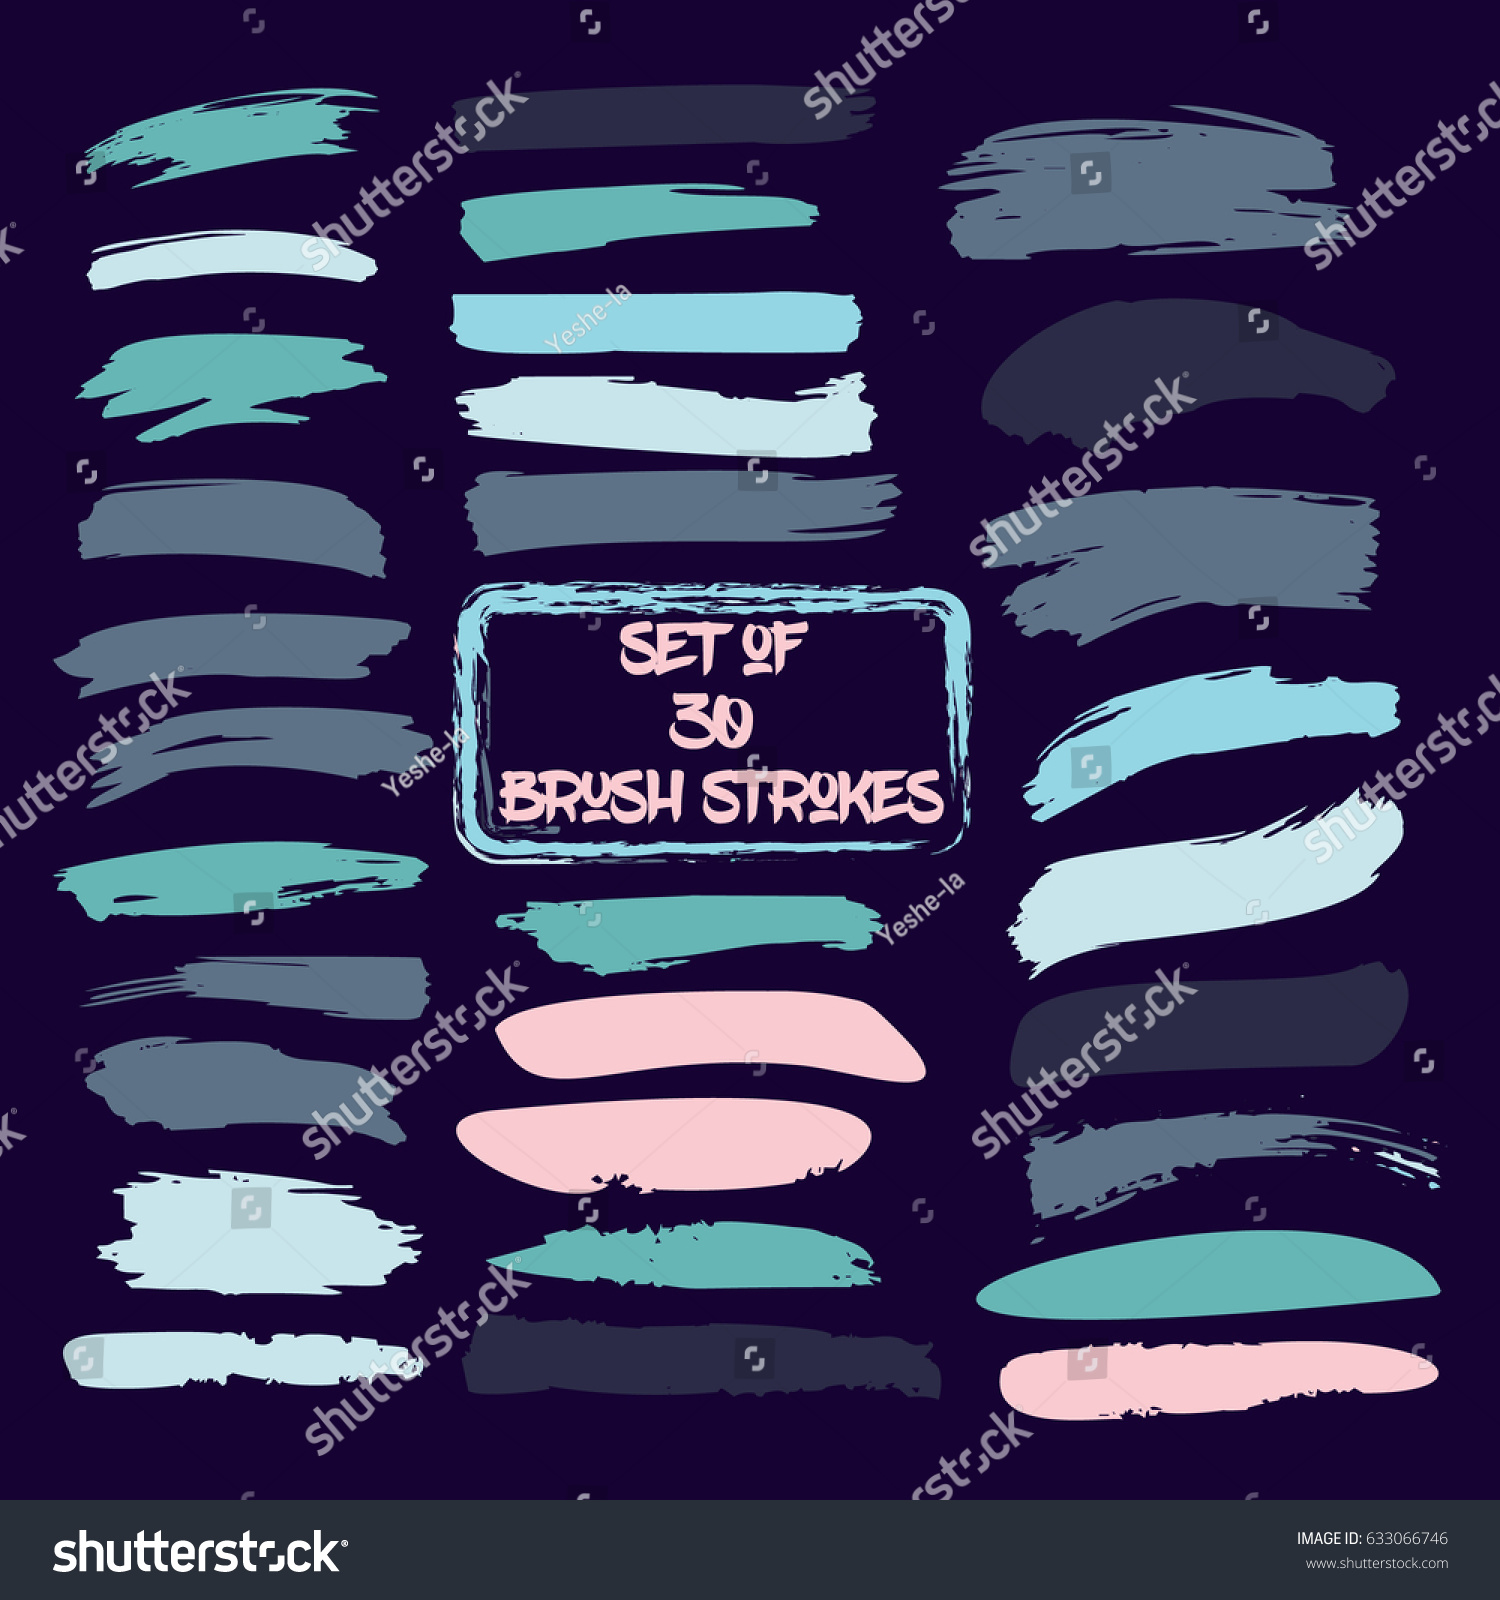 SVG of Set of thirty trendy turquoise, pink and grey vector brush strokes or backgrounds. Hand painted brushstrokes, lines, stripes. Dirty grunge artistic design elements.  svg